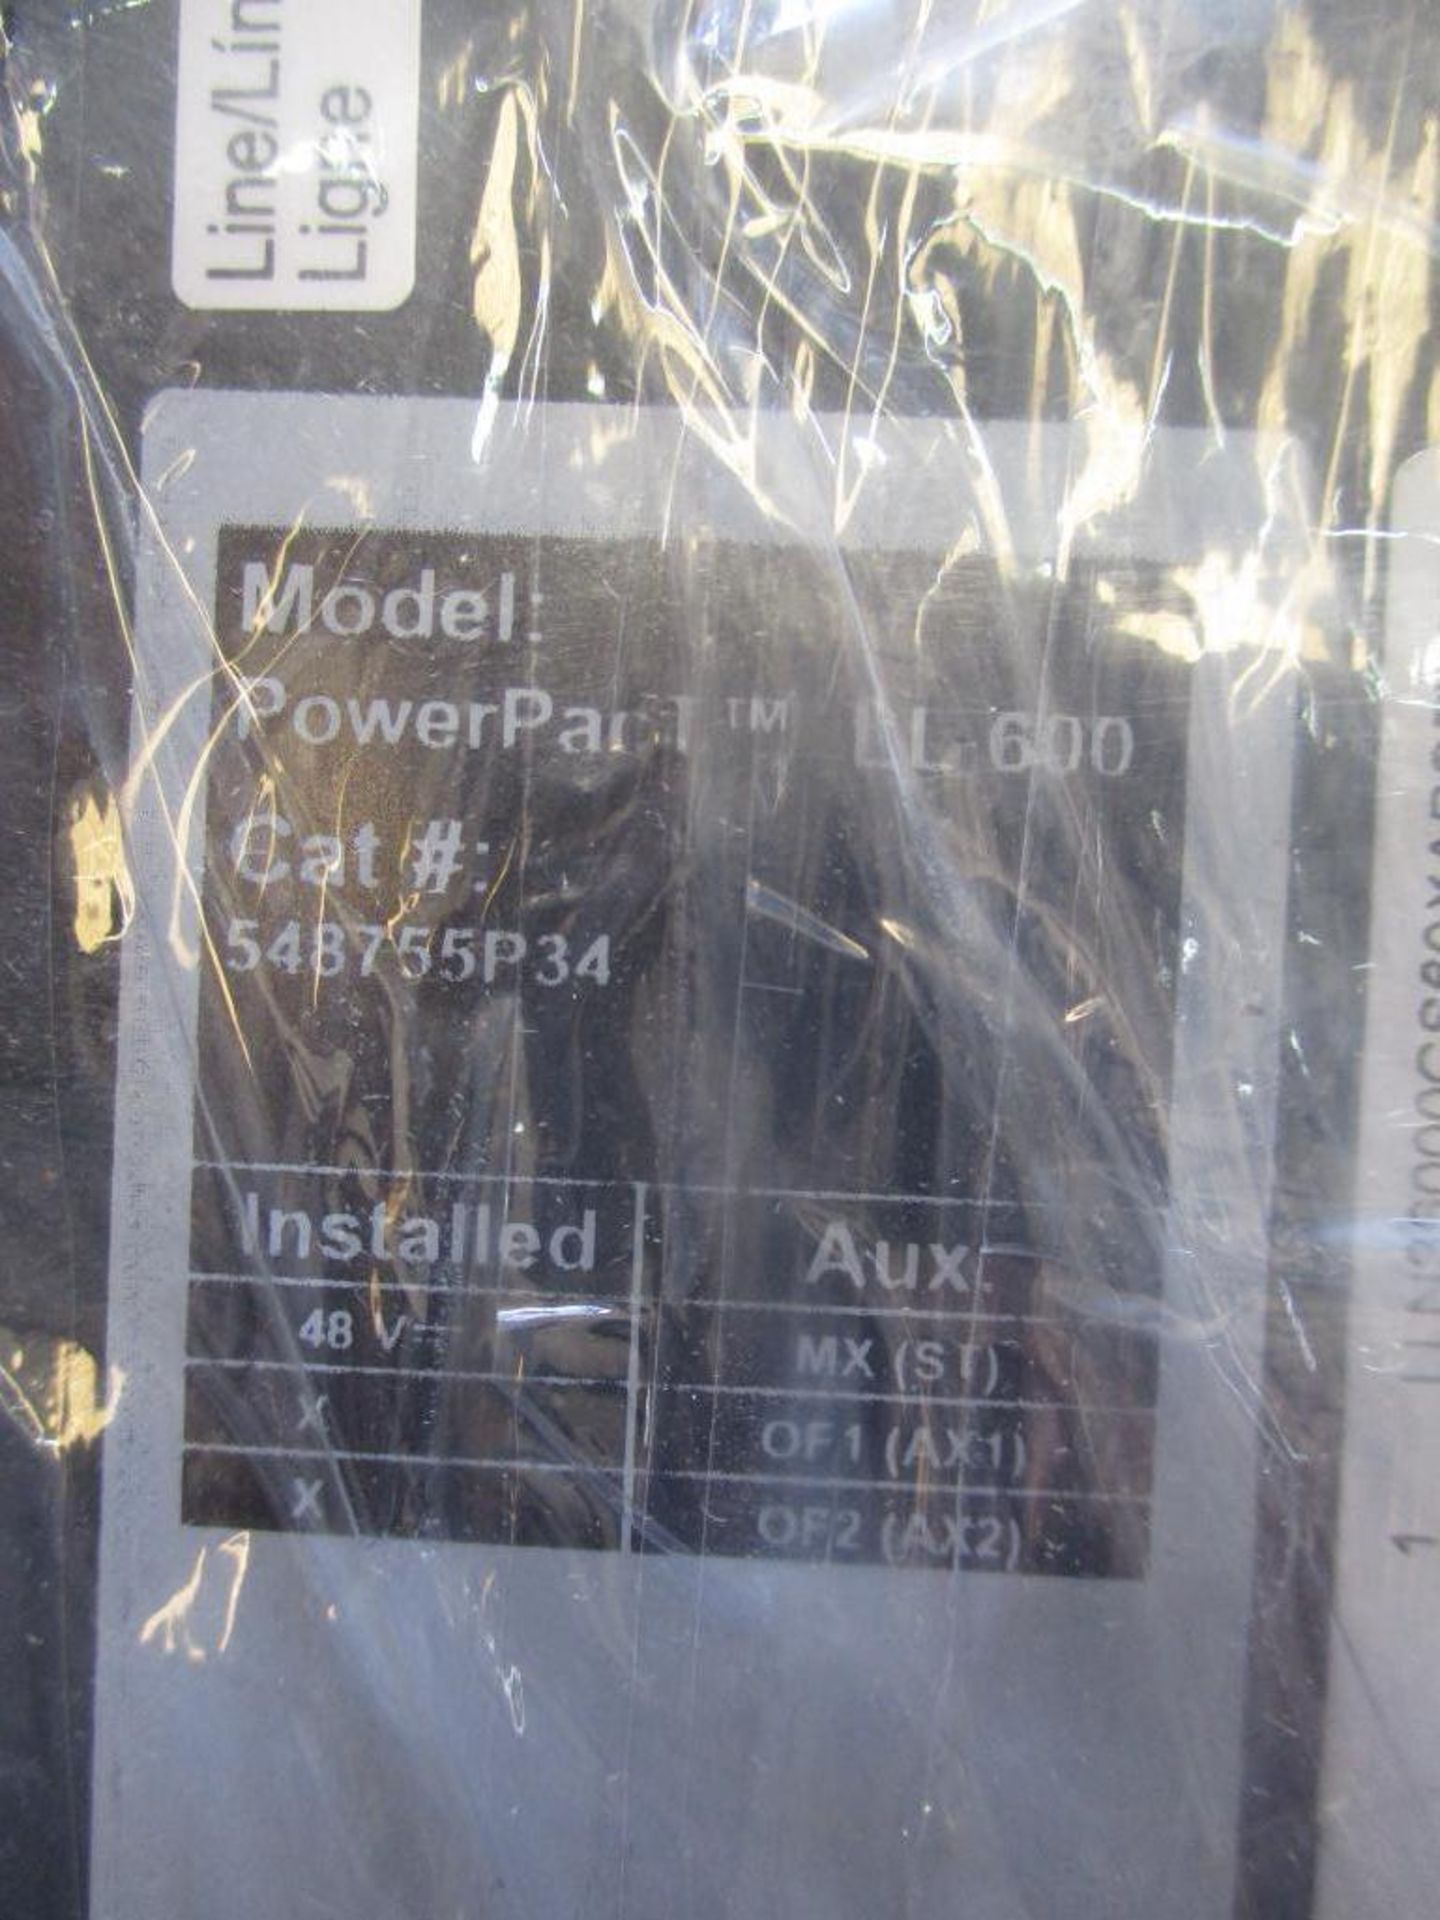 Square D 600 AMP Circuit Breaker, 548755P34, 600A, 3P, 600VAC, PowerPacT (New in Box) - Image 3 of 4